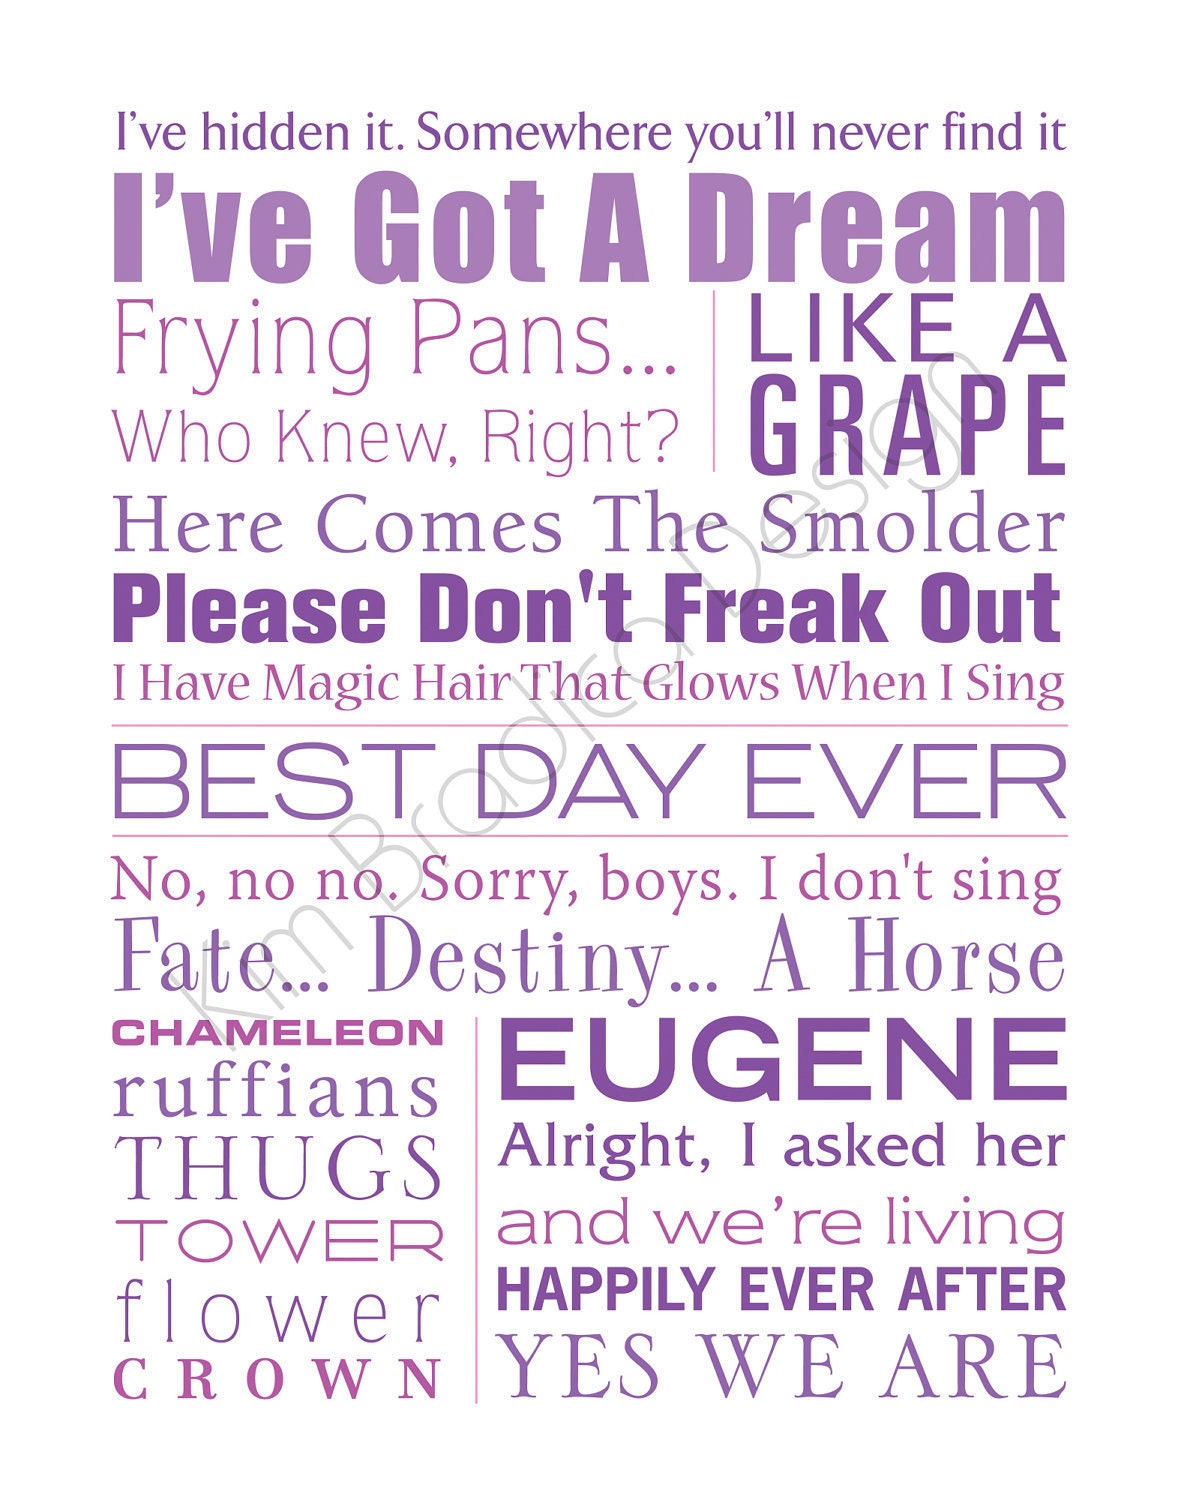 Disney Friendship Quotes From Movies Disney's tangled movie quote